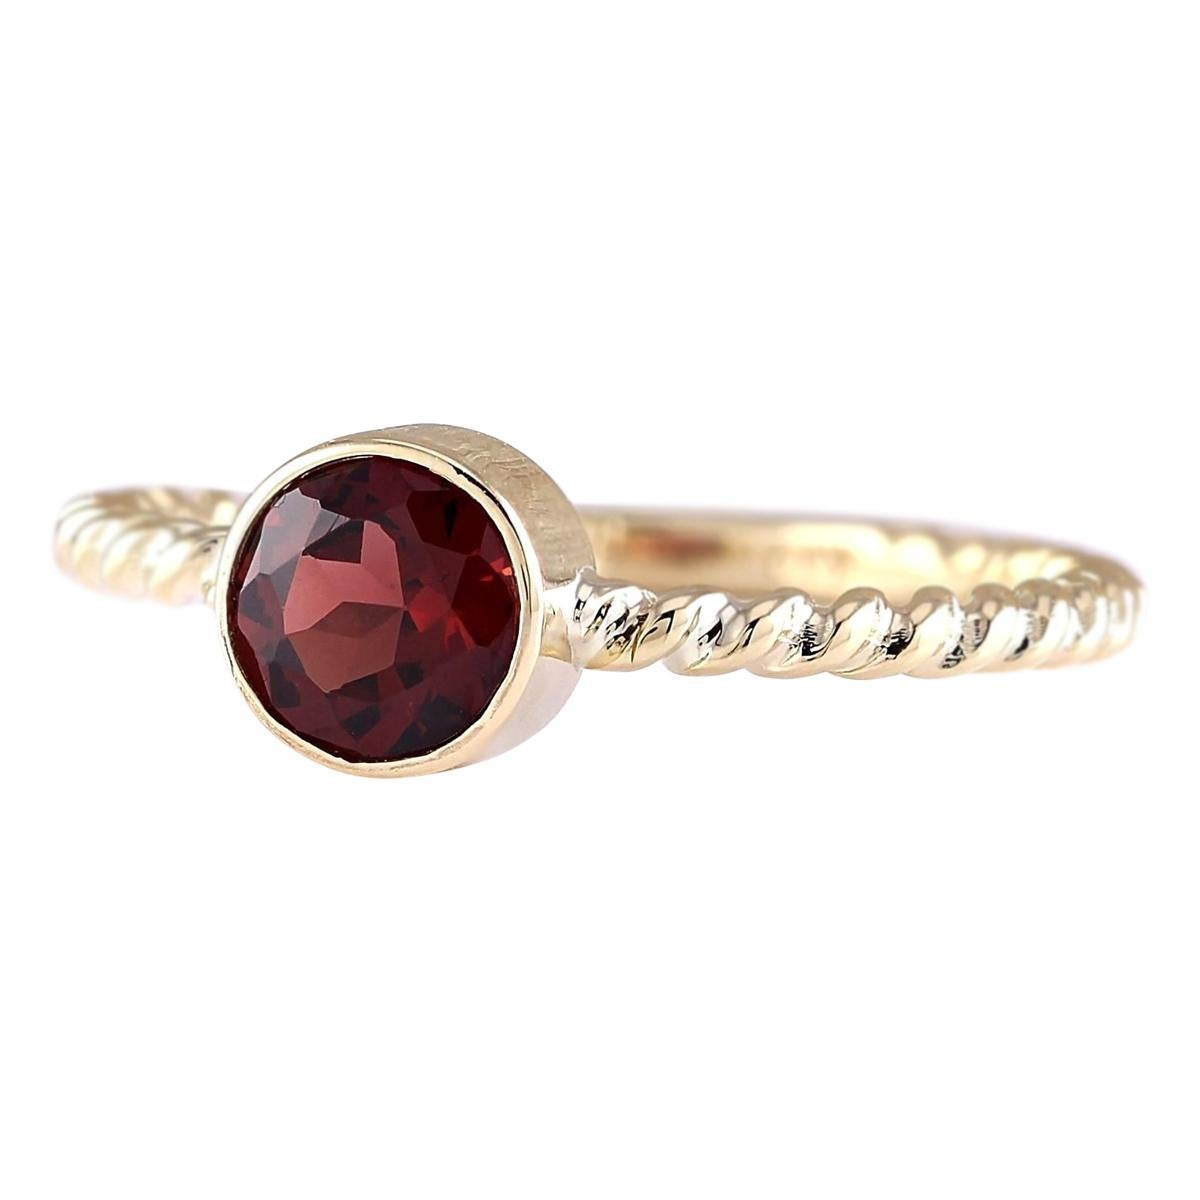 Stamped: 14K Yellow Gold
Total Ring Weight: 2.0 Grams
Total Natural Garnet Weight is 1.00 Carat
Color: Red
Face Measures: 6.00x6.00 mm
Sku: [703226W]